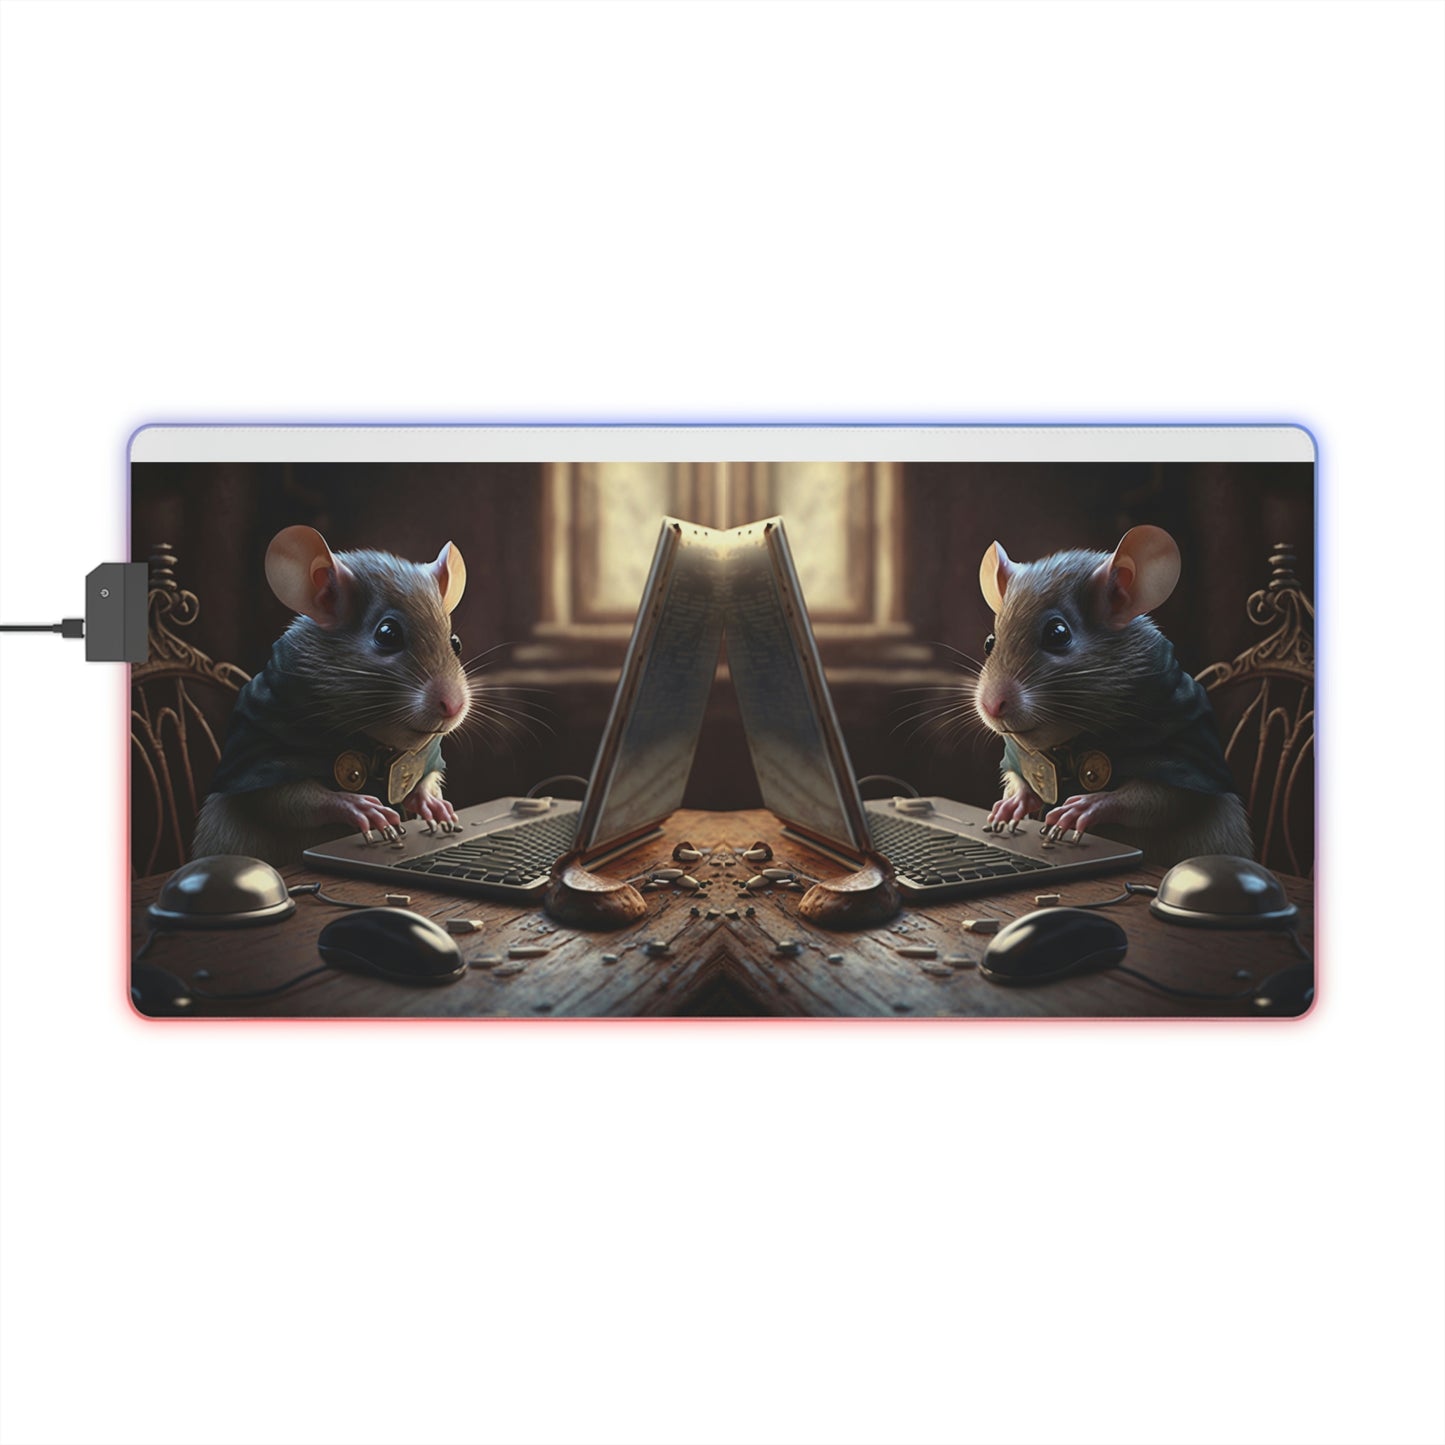 LED Gaming Mouse Pad PC Mouse 2